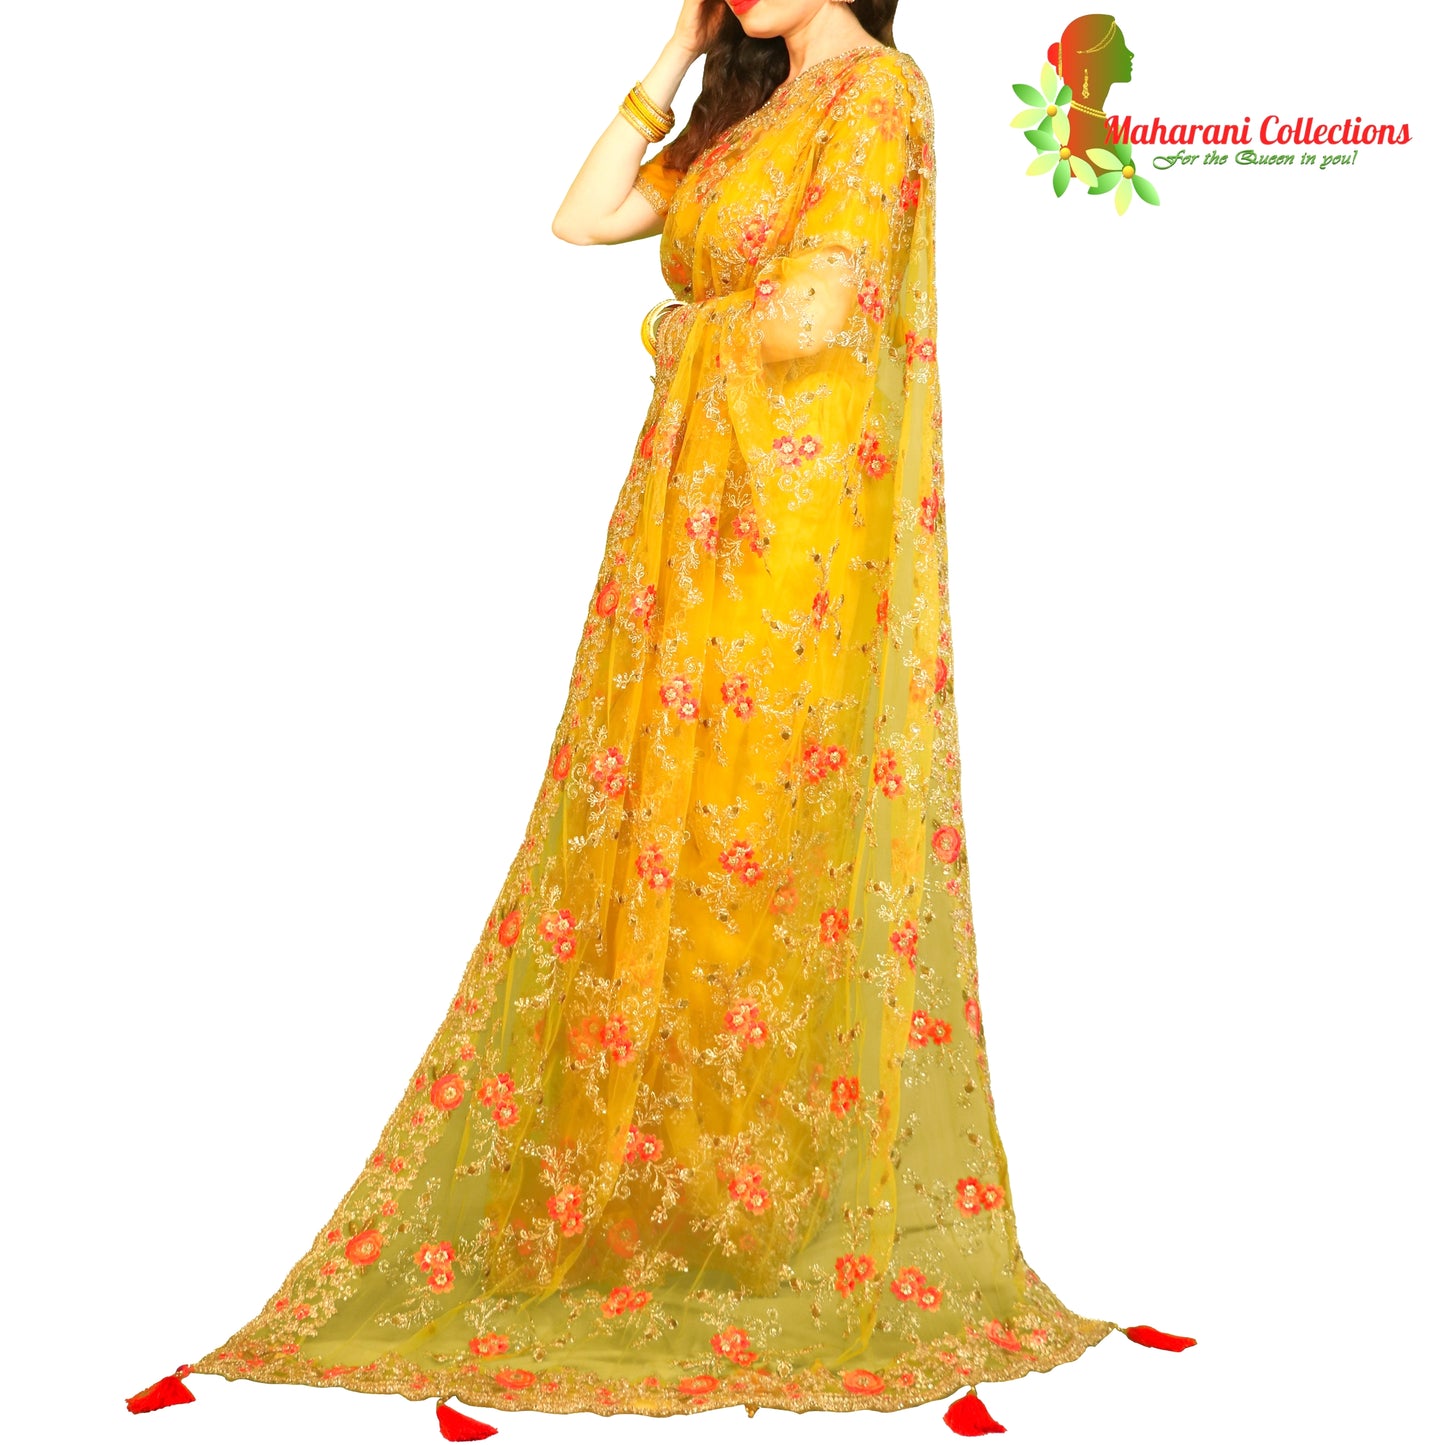 Maharani's Designer Party Wear Net Silk Saree - Deep Yellow (with stitched Blouse and Petticoat)